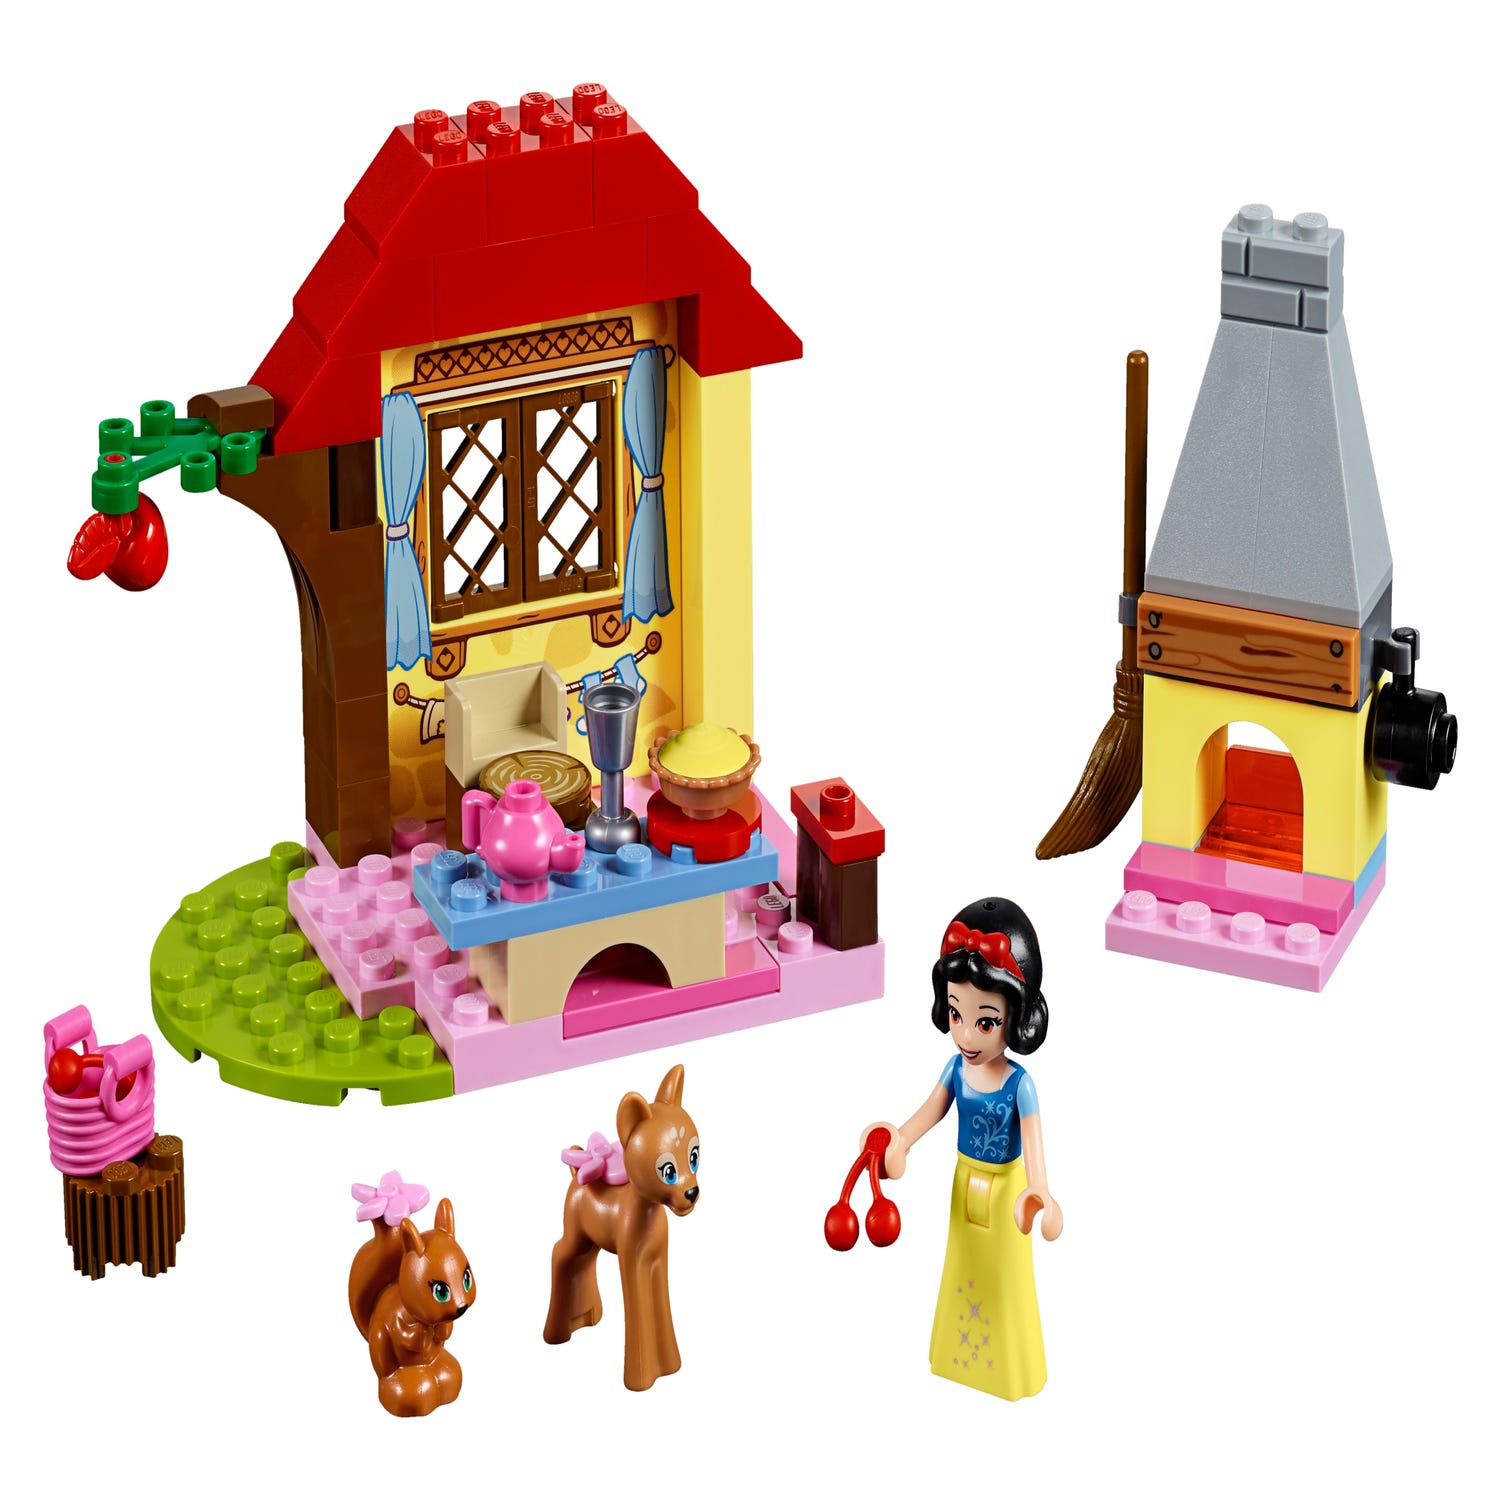 Snow White's Forest Cottage 10738 Juniors Buy online at the